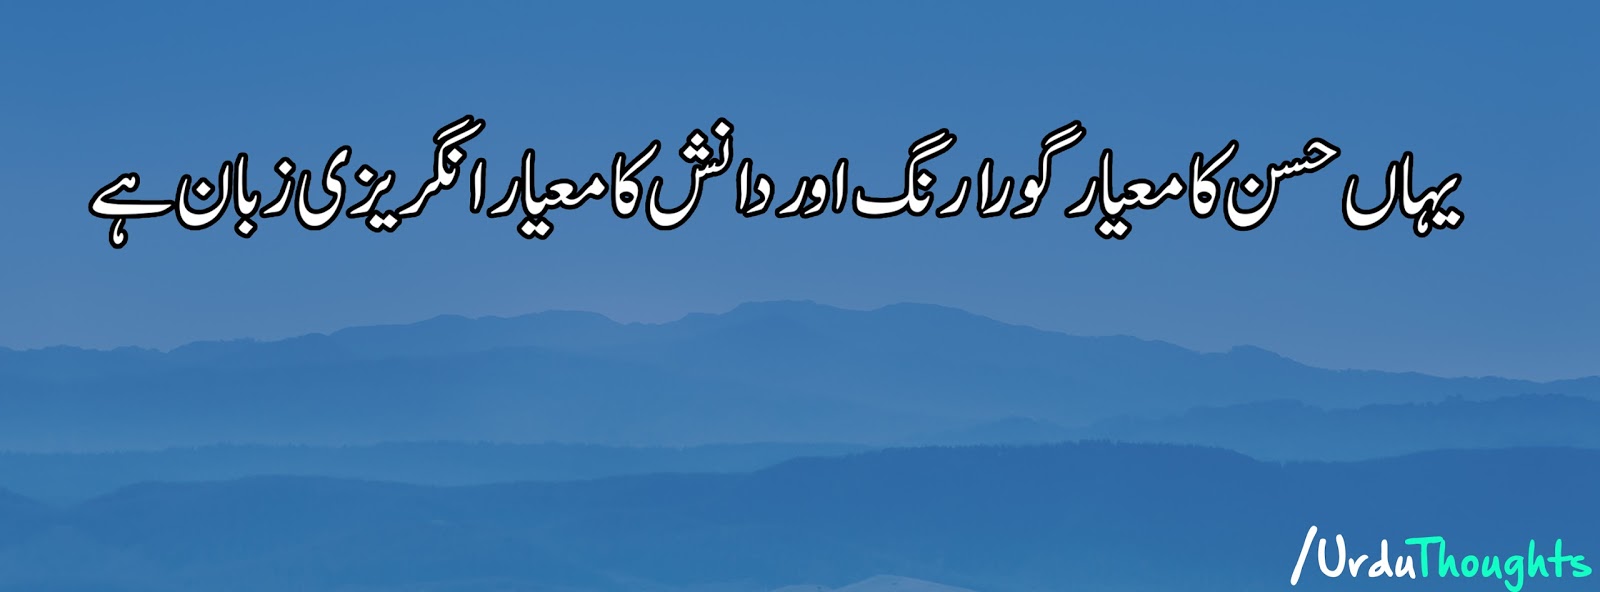 Beautiful Urdu Quotes Timeline Cover s Read line Free Download With Beautiful Background covers urdu quotes